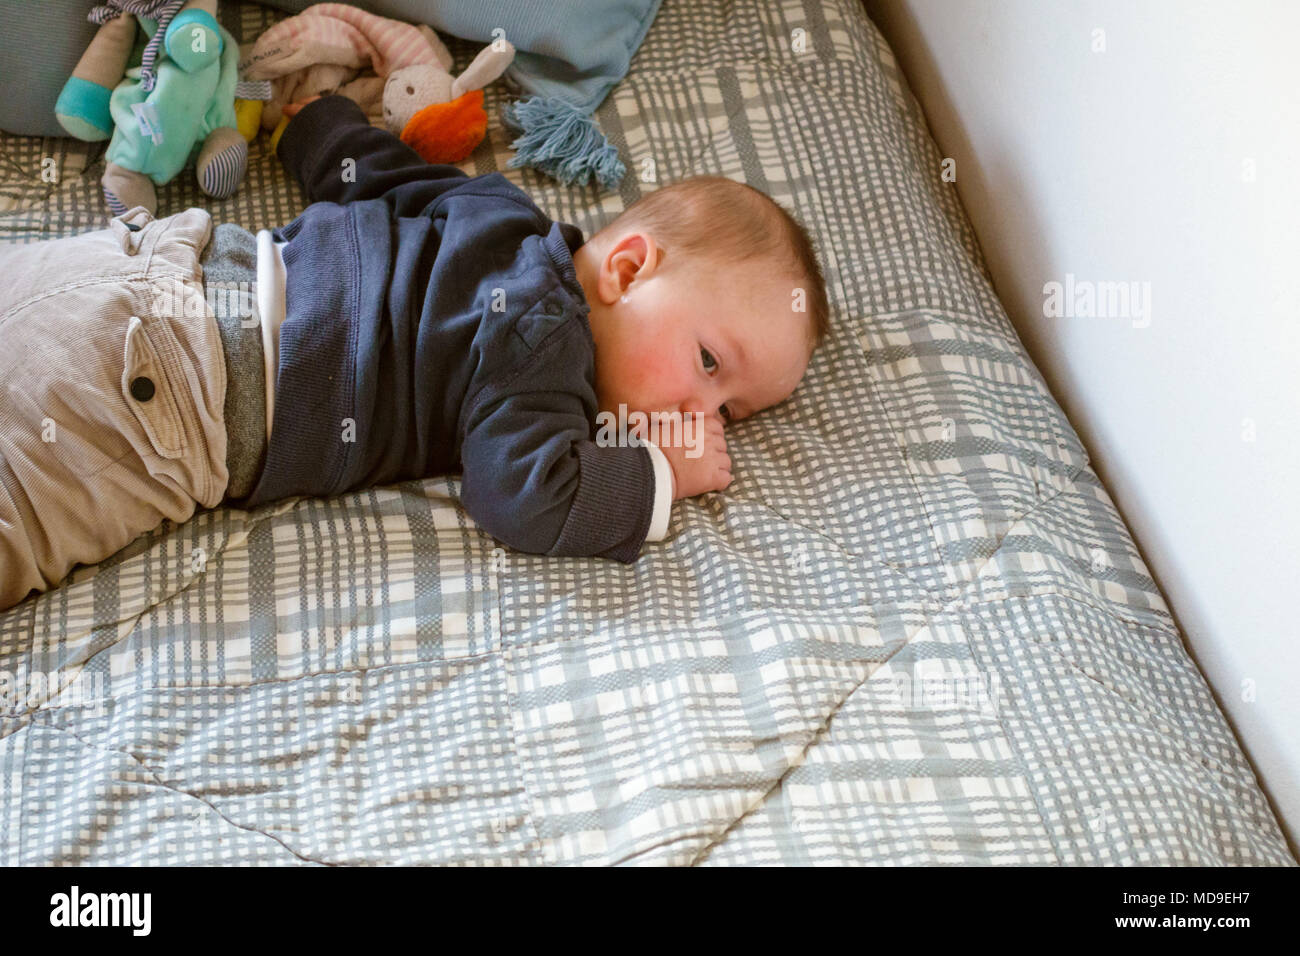 Baby boy resting and thumb sucking on bed, Greece Stock Photo